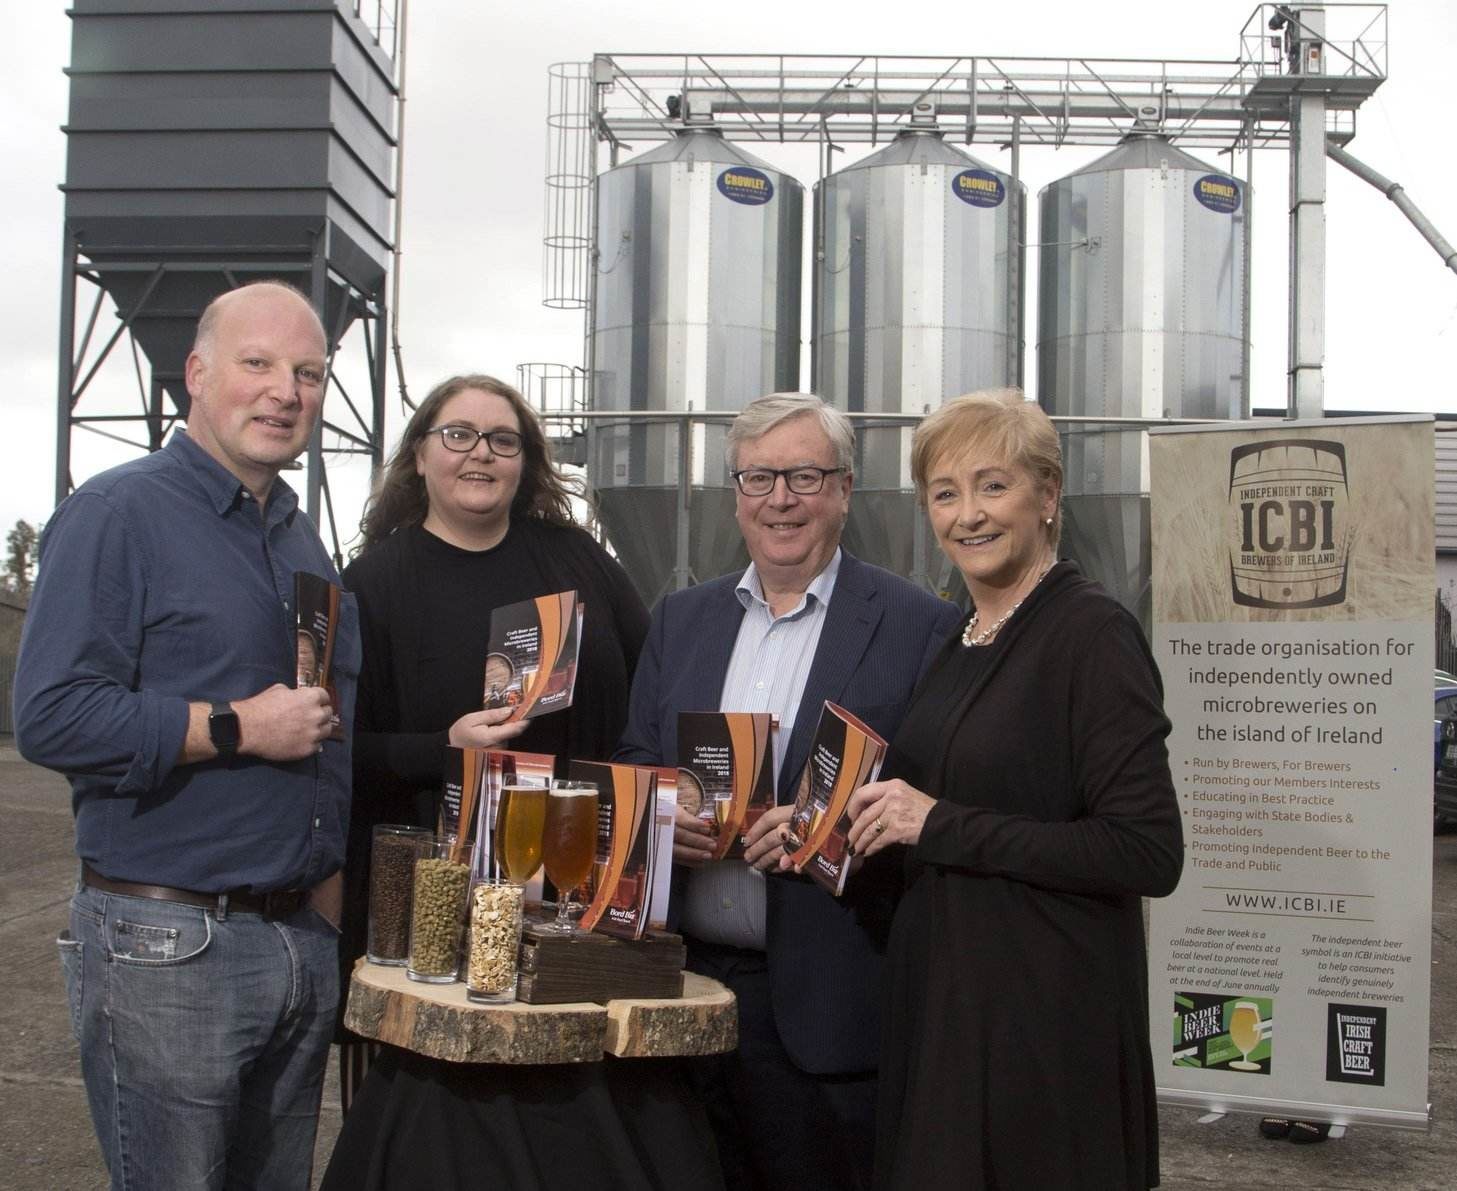 At the launch of the report at The Porterhouse Brewery in Dublin were (from left): ICBI Chair Peter Mosley, ICBI Co-Ordinator Elisabeth Ryan, Report Author Bernard Feeny and Bord Bia Beverage Sector Manager Denise Murphy.